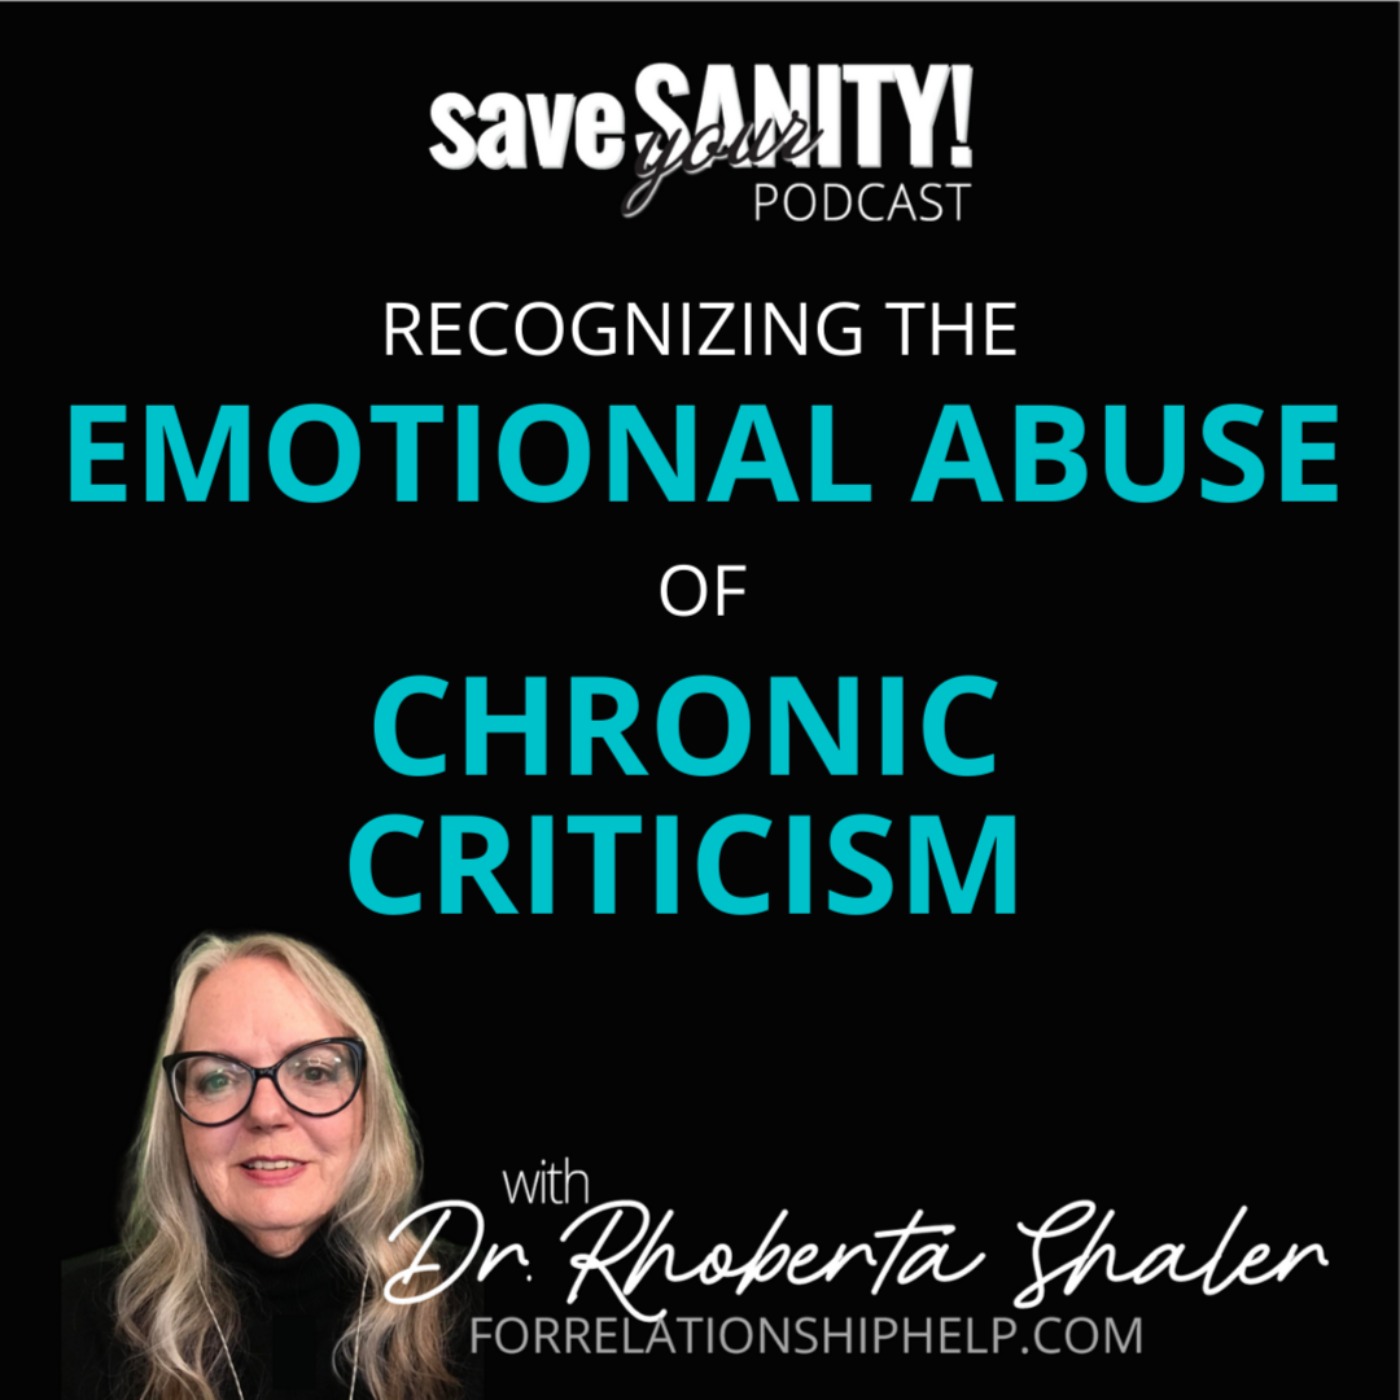 Recognizing the Emotional Abuse of Chronic Criticism